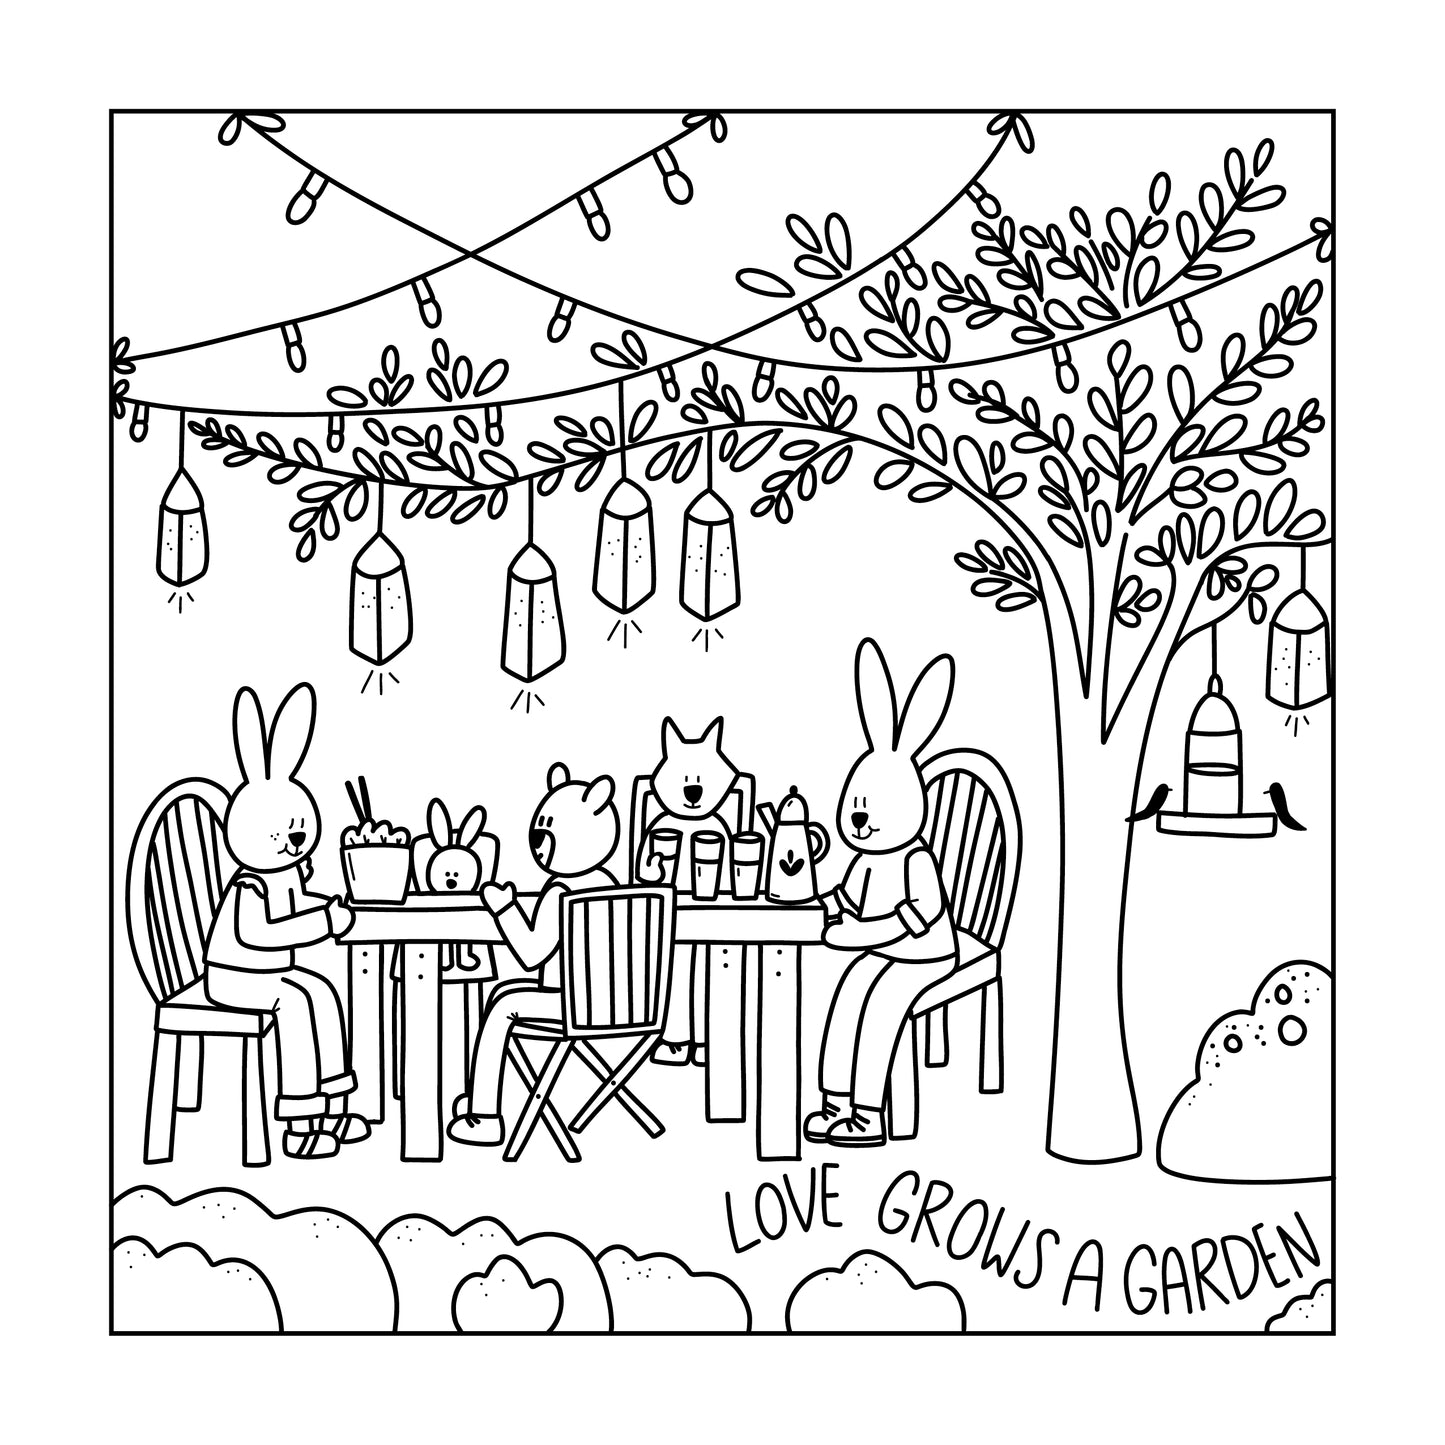 Free Coloring Pages The Dogwoods Grow a Garden